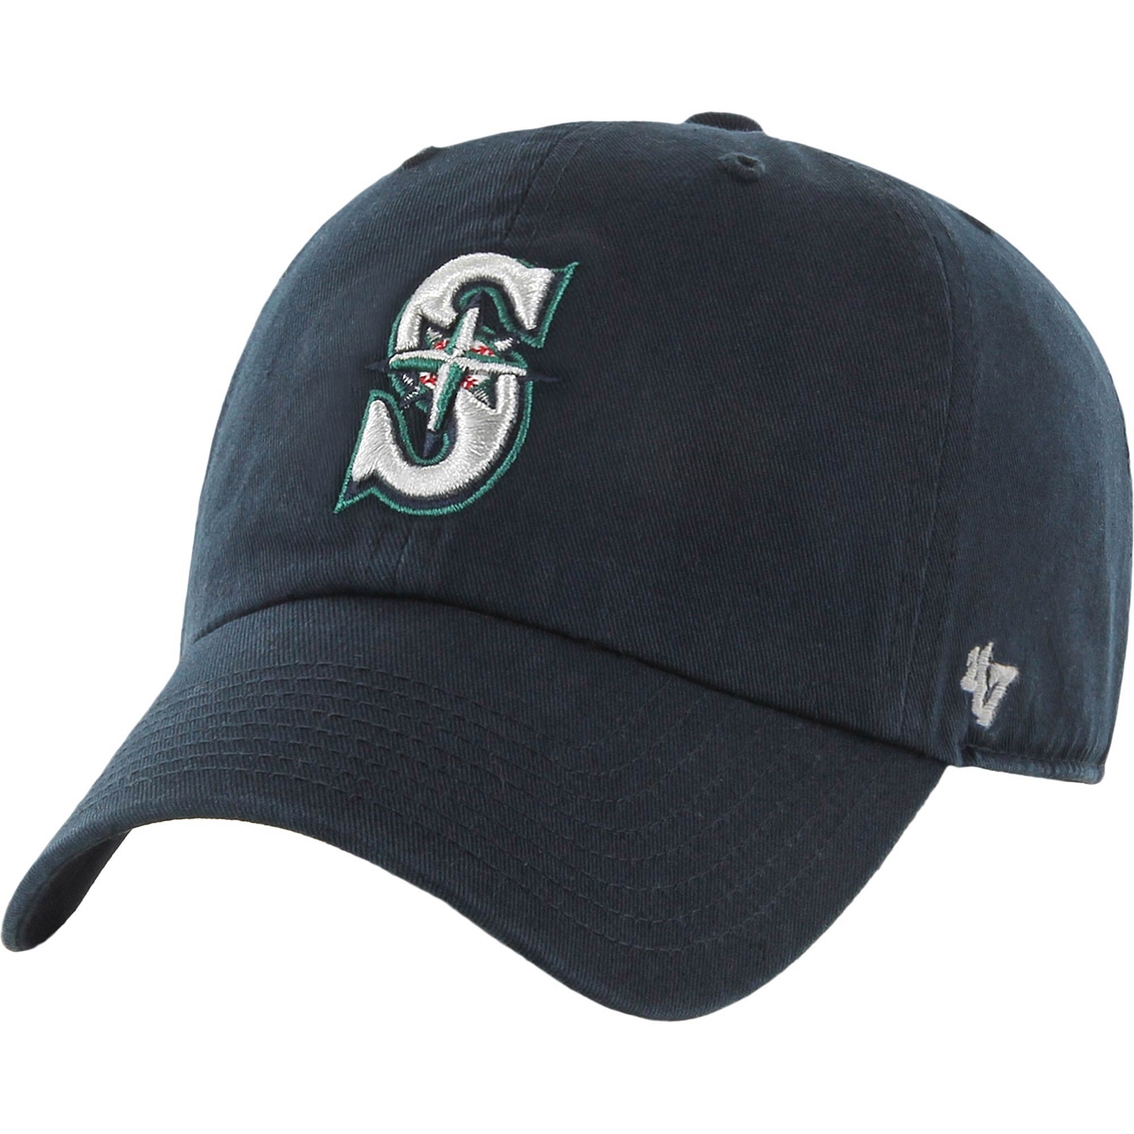 47 Brand MLB Seattle Mariners Clean Up Baseball Cap - Image 1 of 2